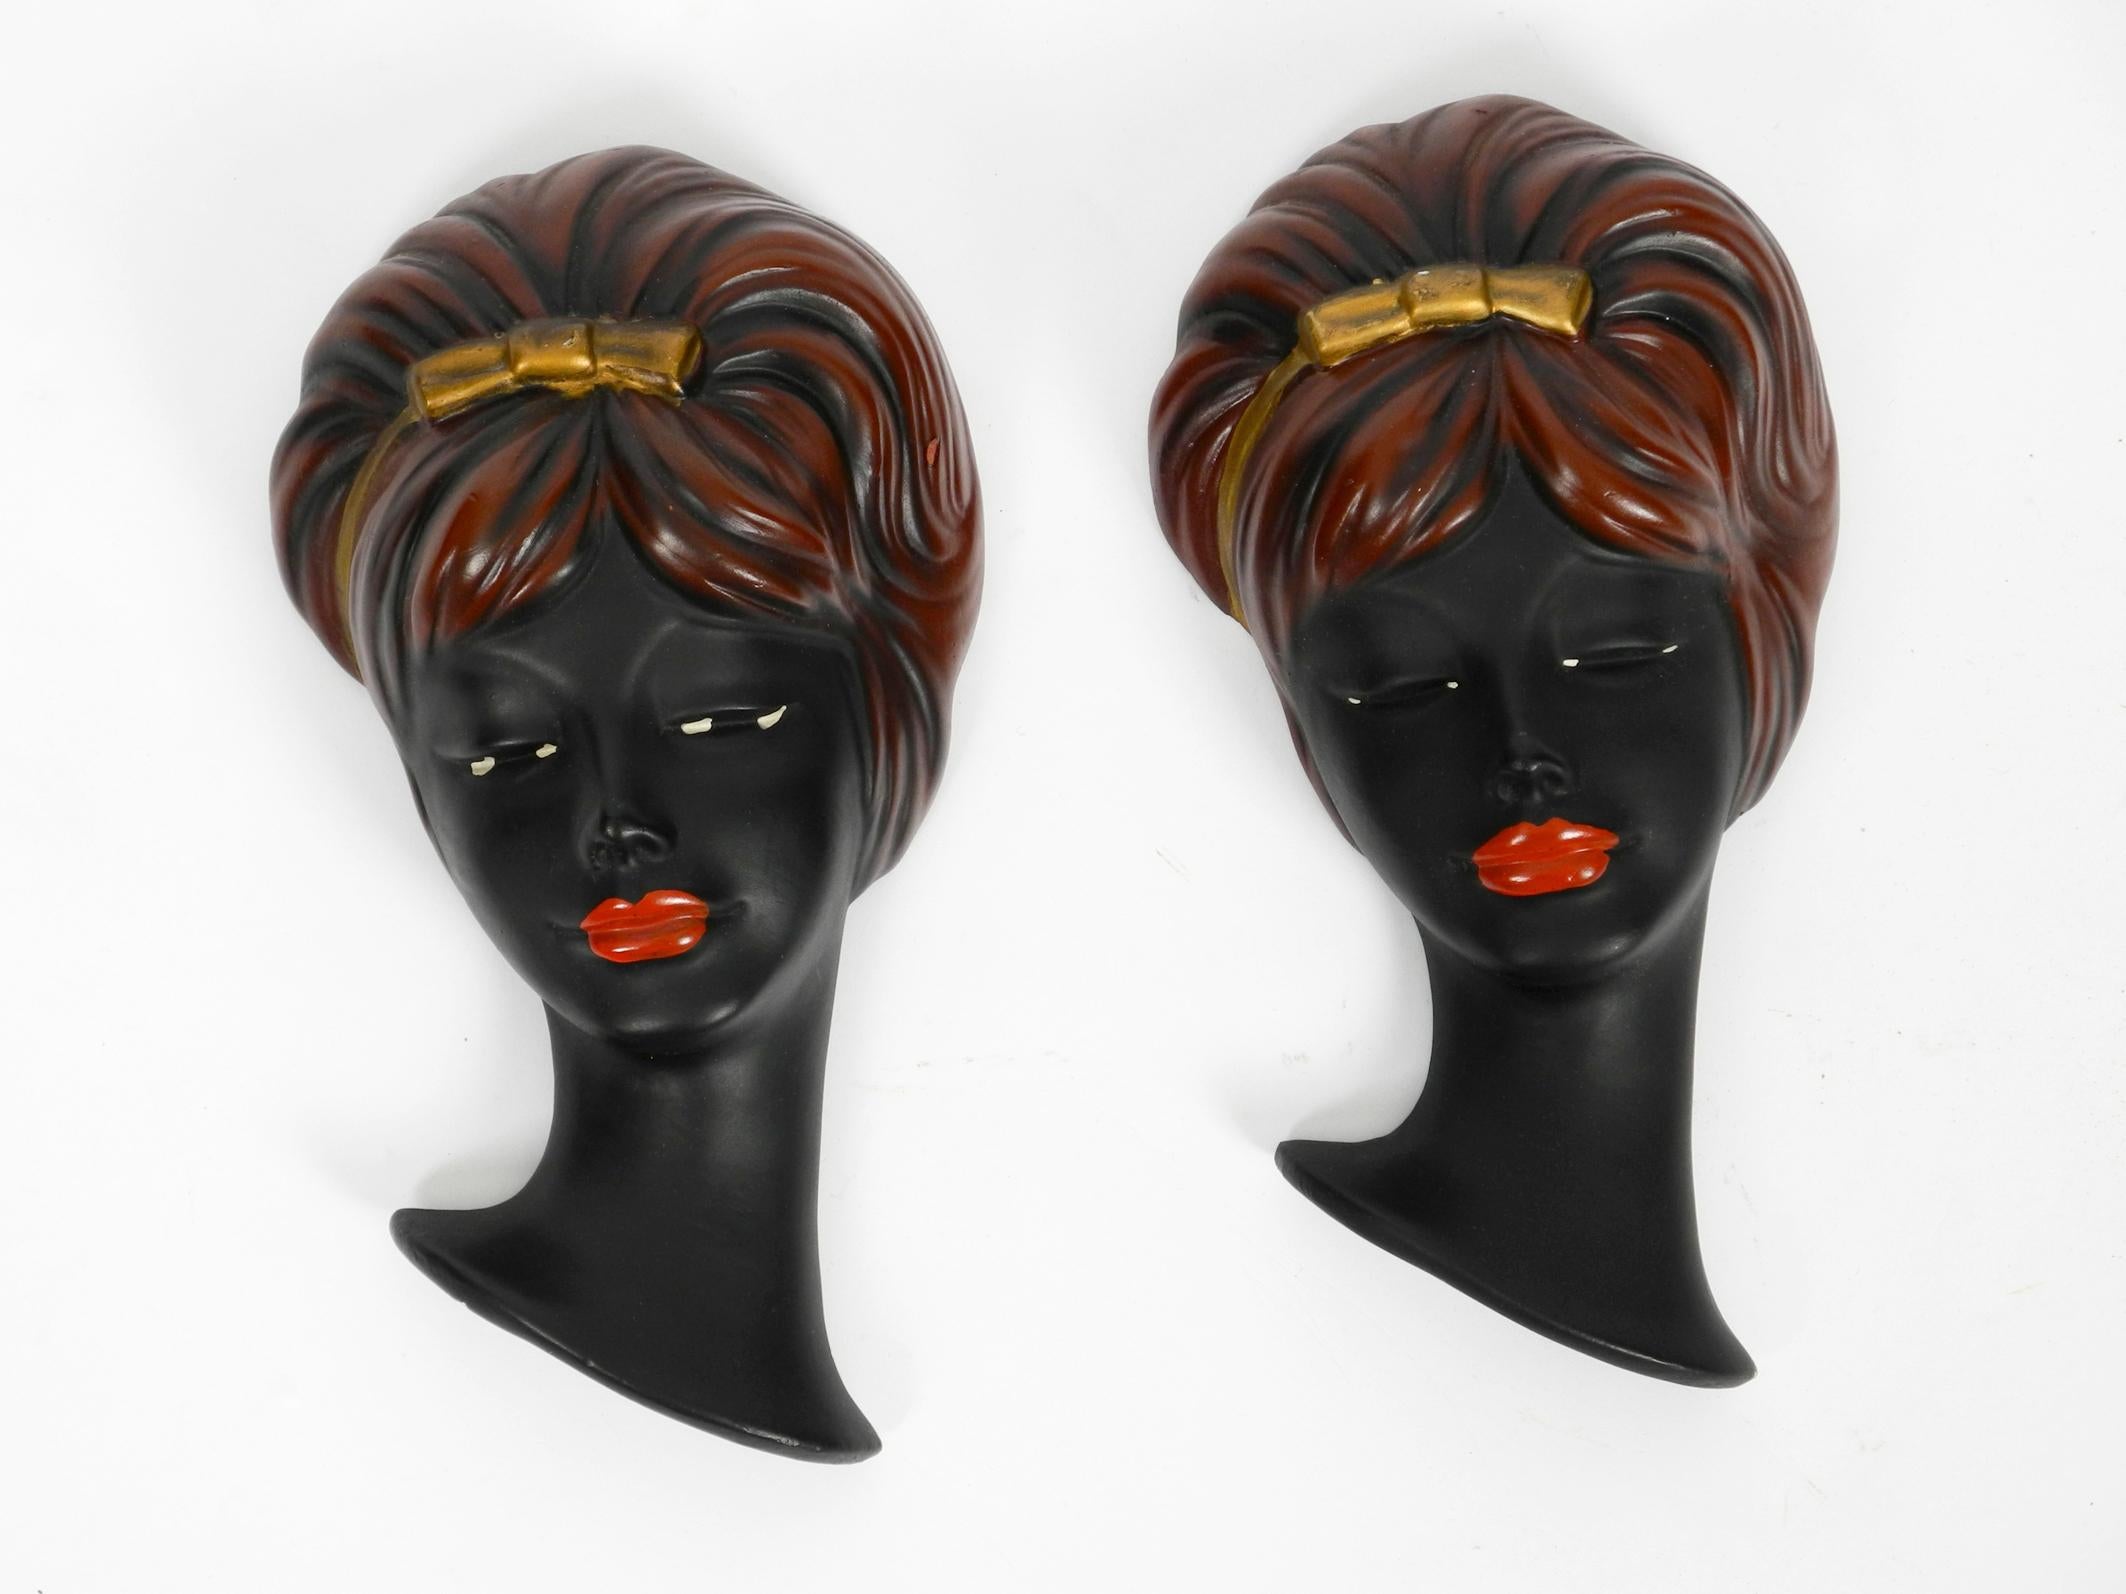 Pair of beautiful hand painted ceramic women's faces
as a wall decoration from the 1950s.
Classic midcentury design. Very high quality and detailed.
Very good condition without chipping or cracks.
Original condition. Very few signs of wear.
A